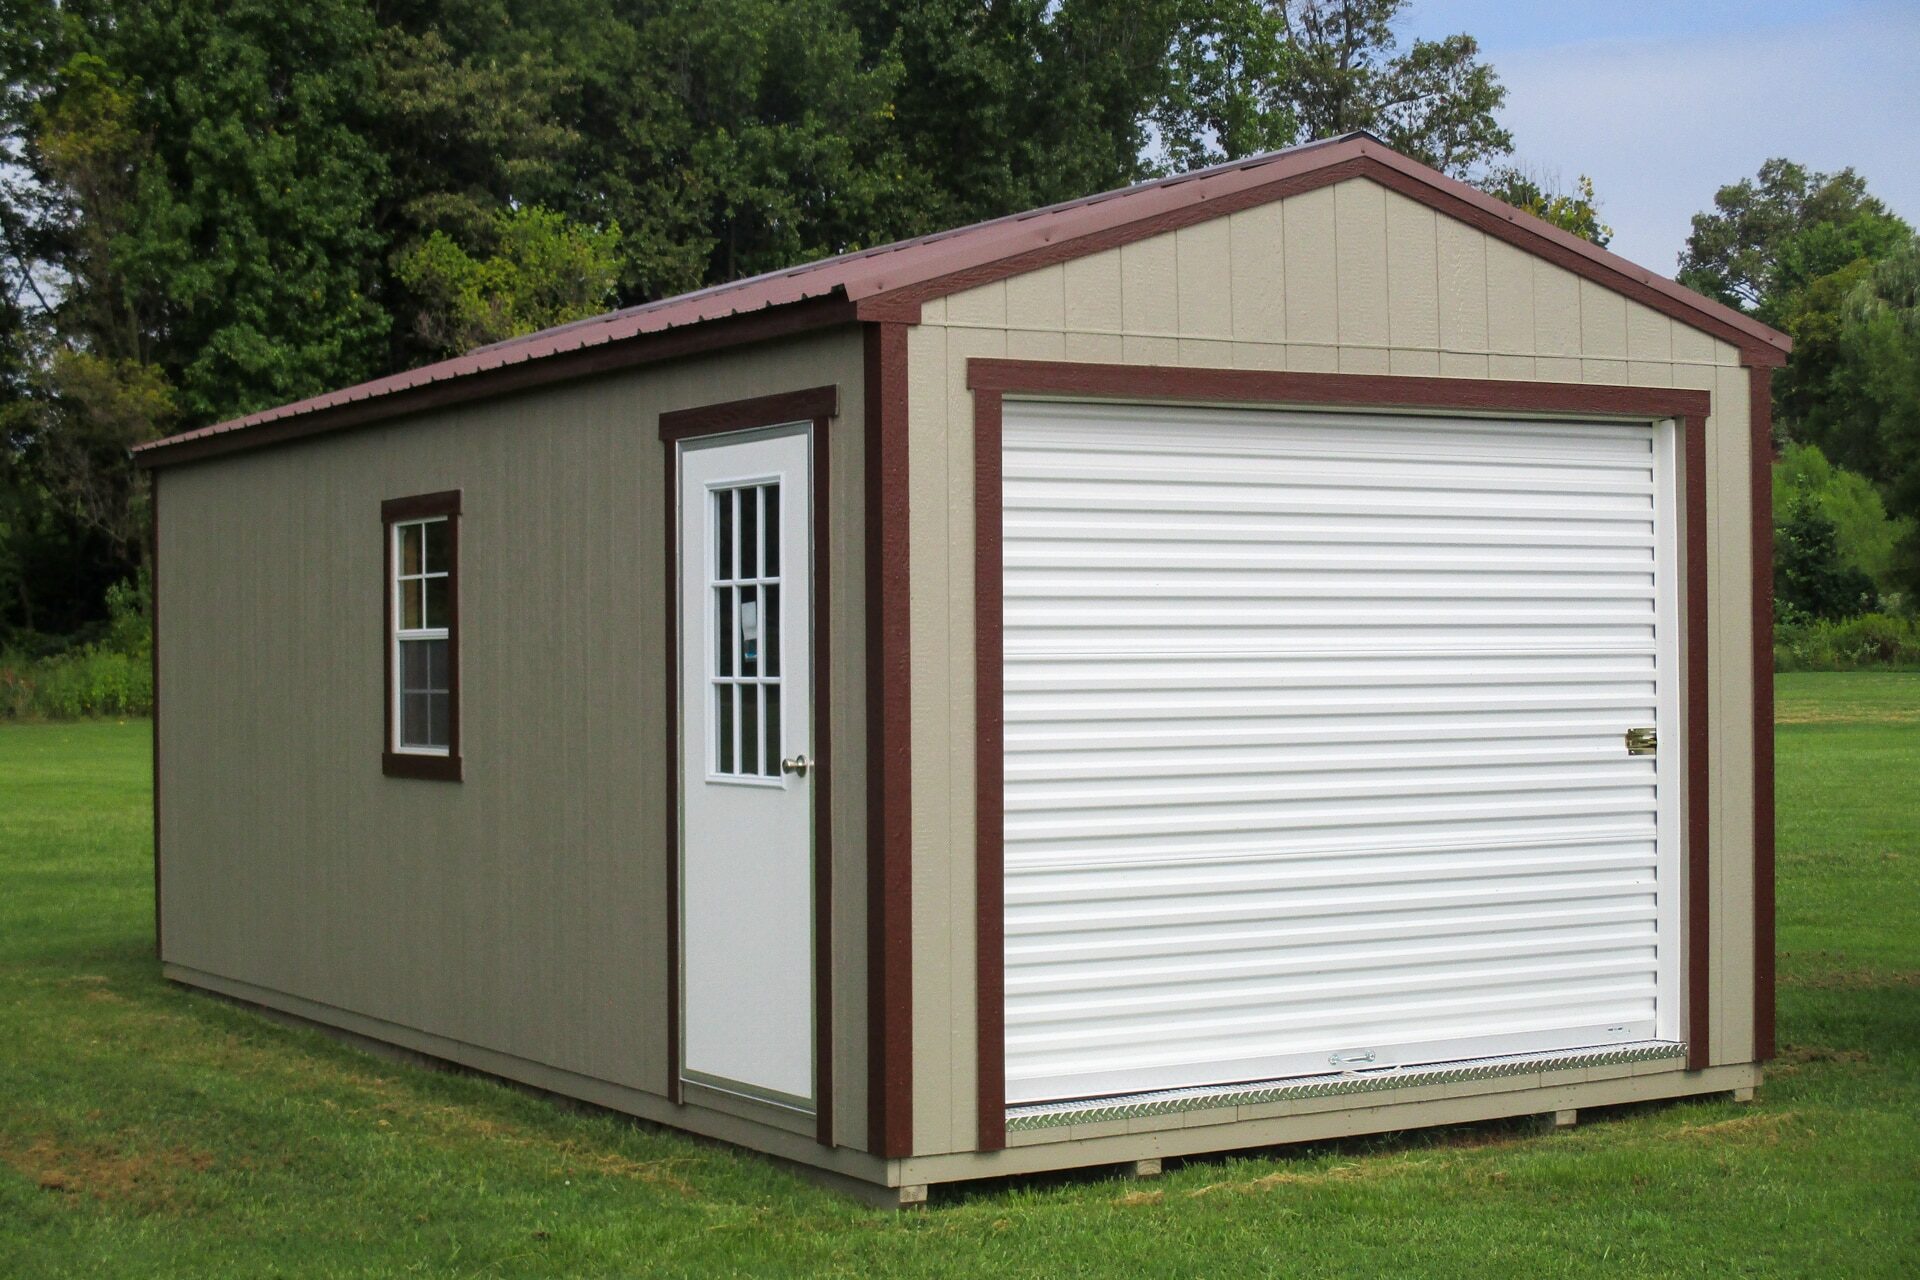 Portable Garages for Sale in Waynesville, MO